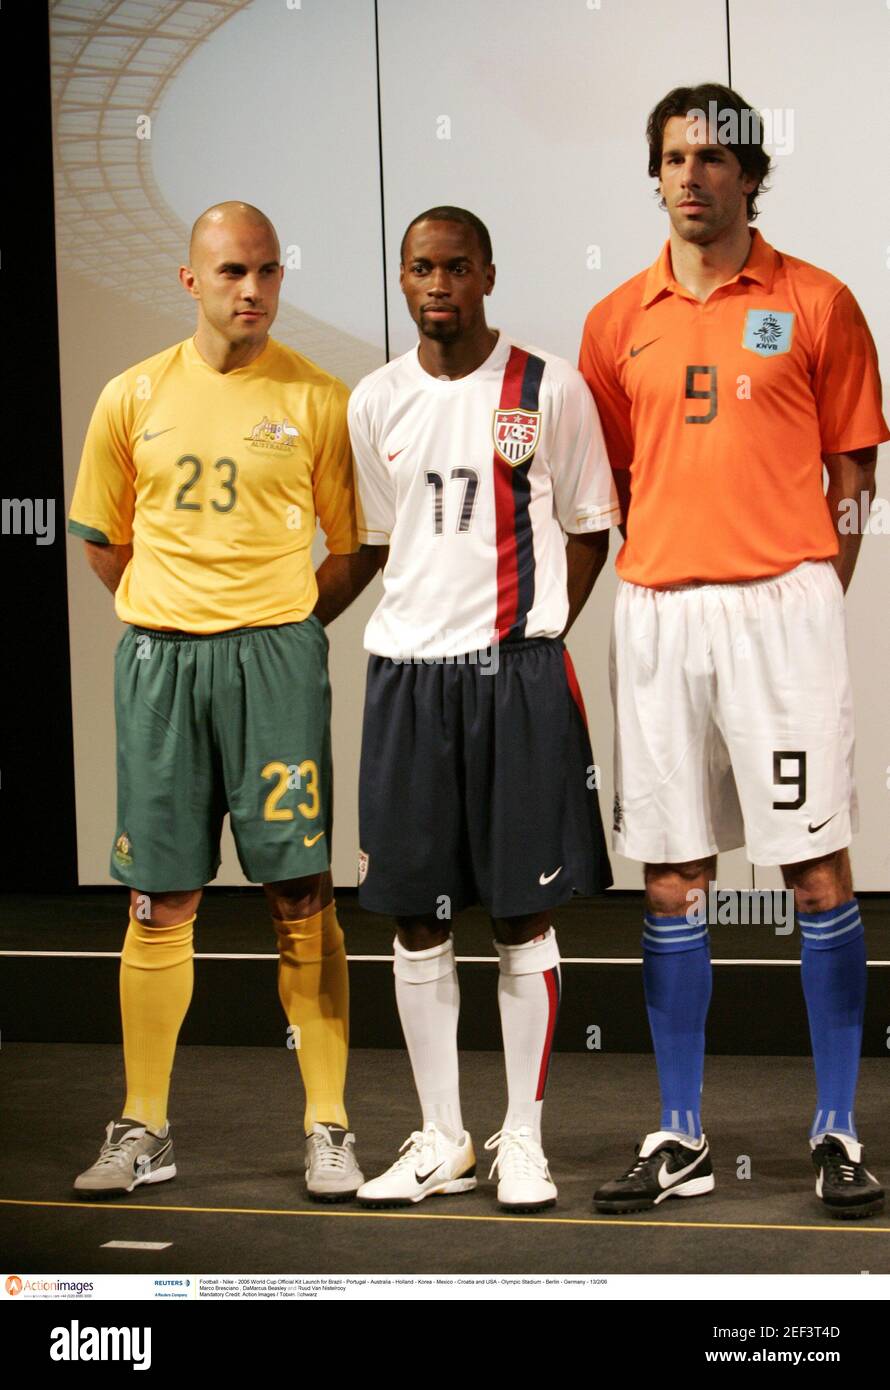 Football - Nike - 2006 World Cup Official Kit Launch for Brazil - Portugal - Australia - Holland - Korea - Mexico - Croatia and USA - Olympic Stadium - Berlin - Germany - 13/2/06  Marco Bresciano , DaMarcus Beasley and Ruud Van Nistelrooy  Mandatory Credit: Action Images / Tobias Schwarz Stock Photo